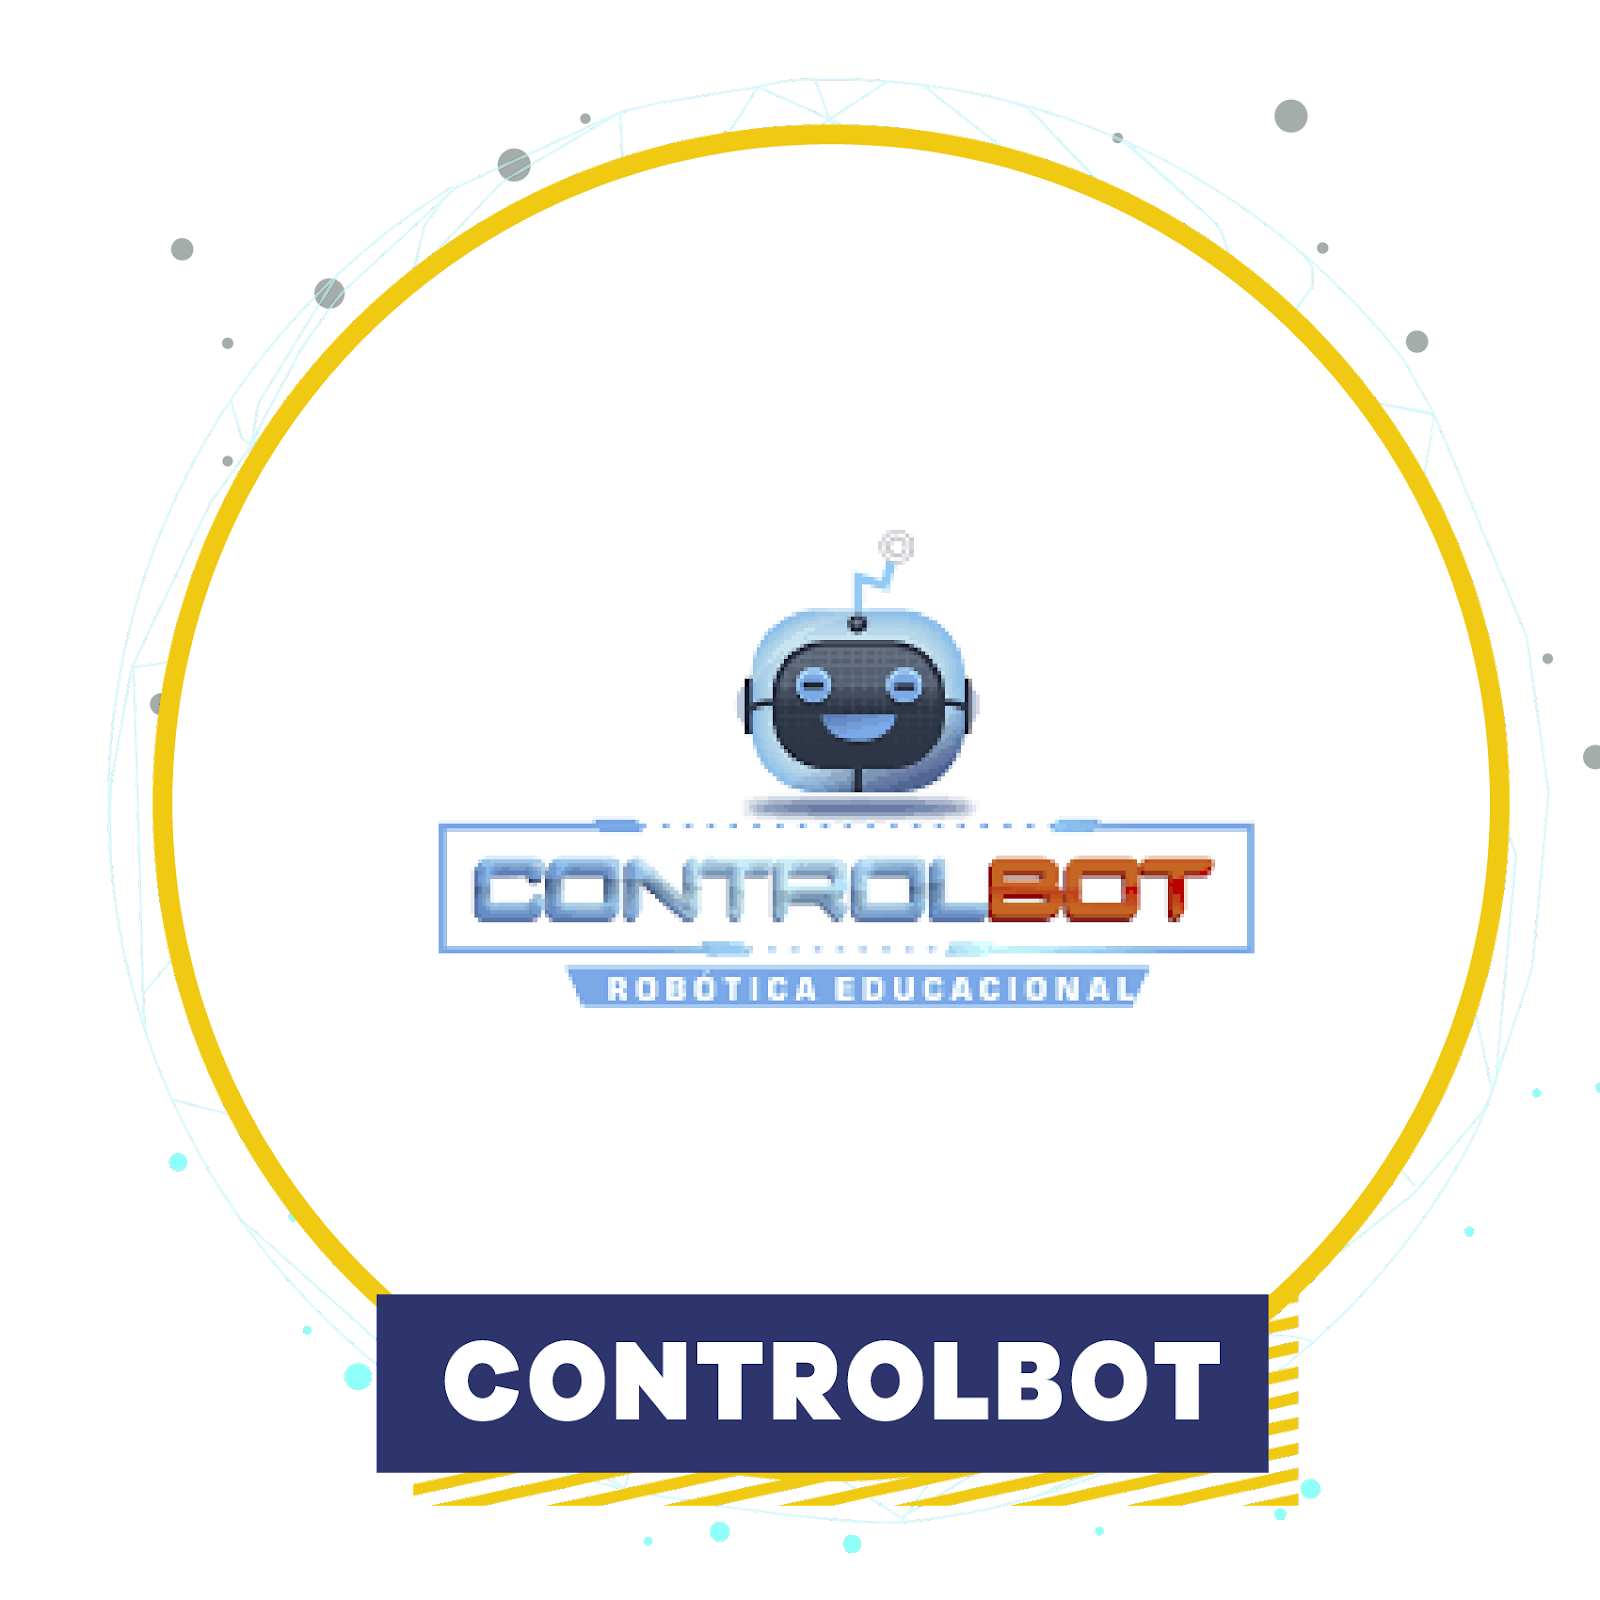 Controlbot